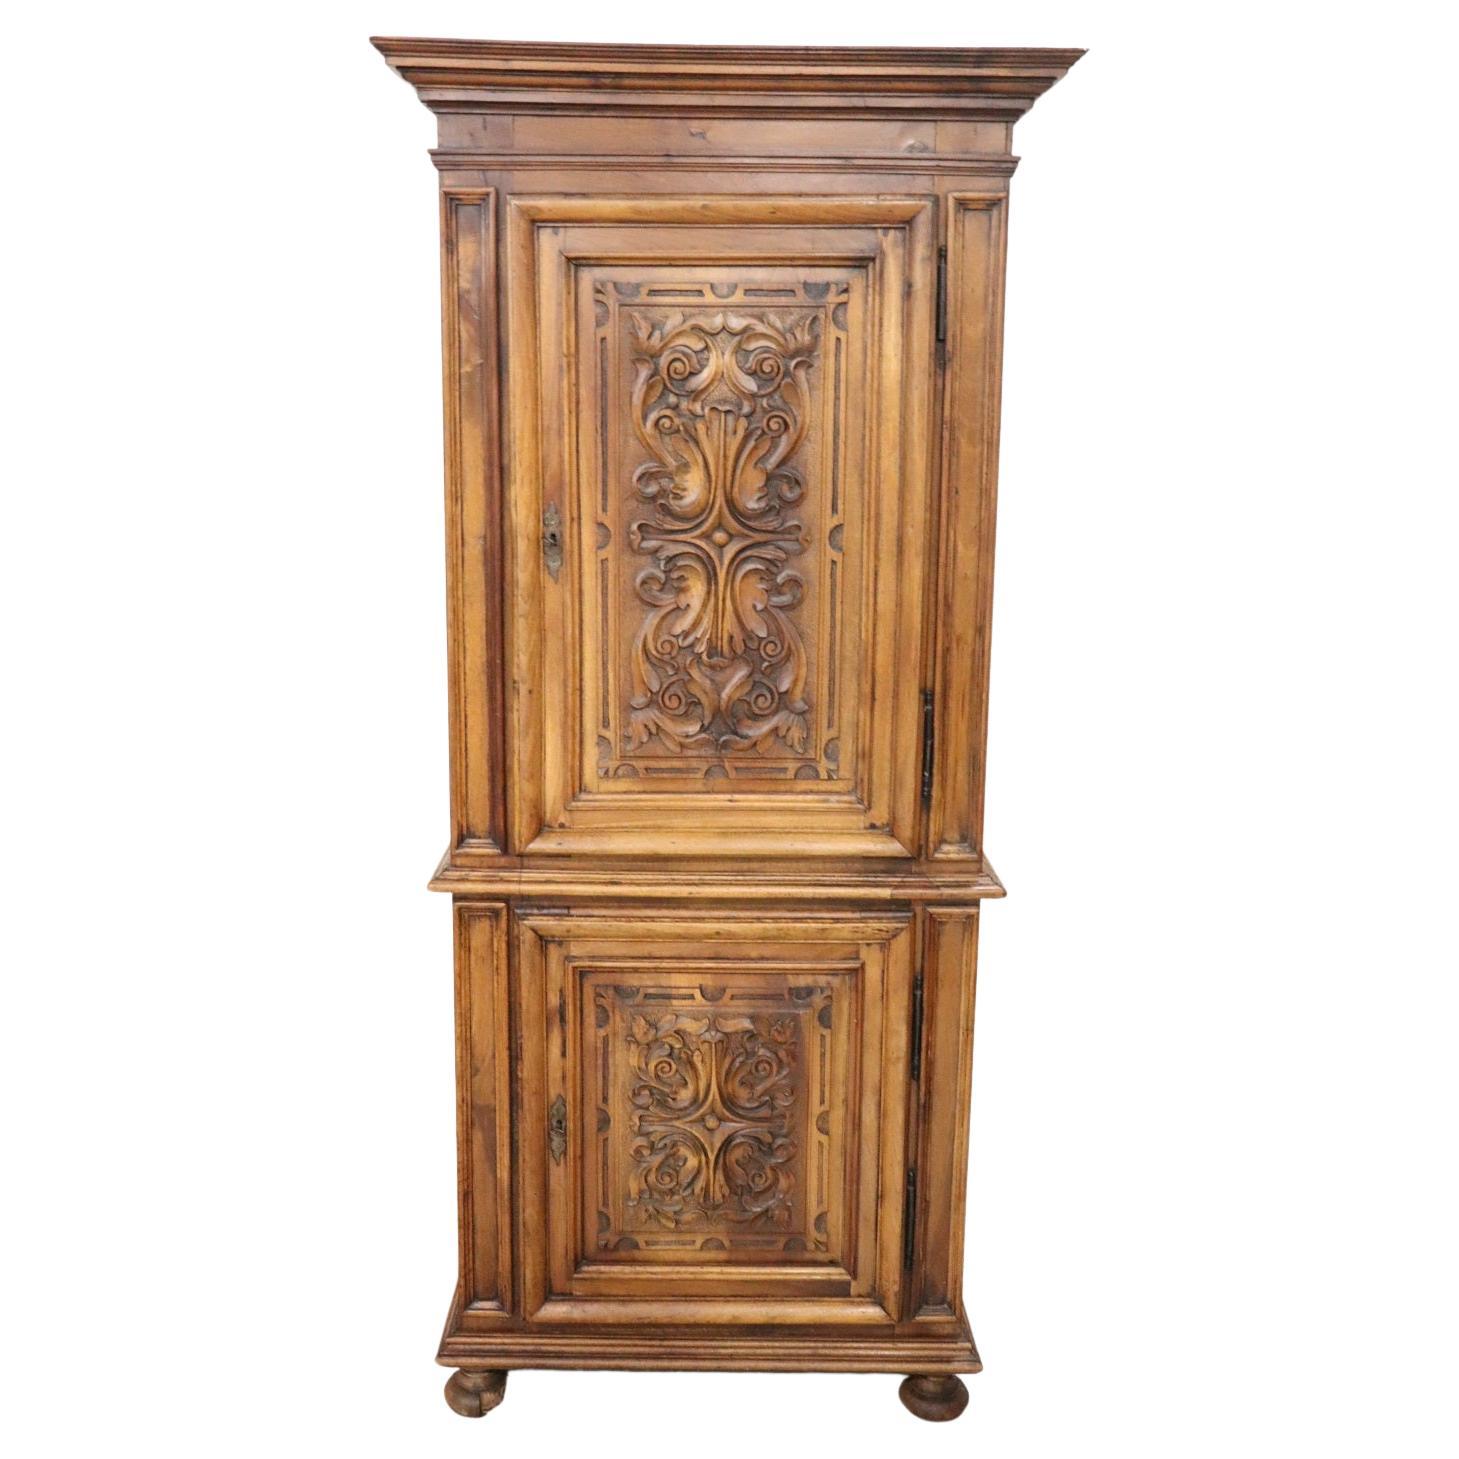 19th Century Italian Antique Small Cabinet in Solid Carved Walnut